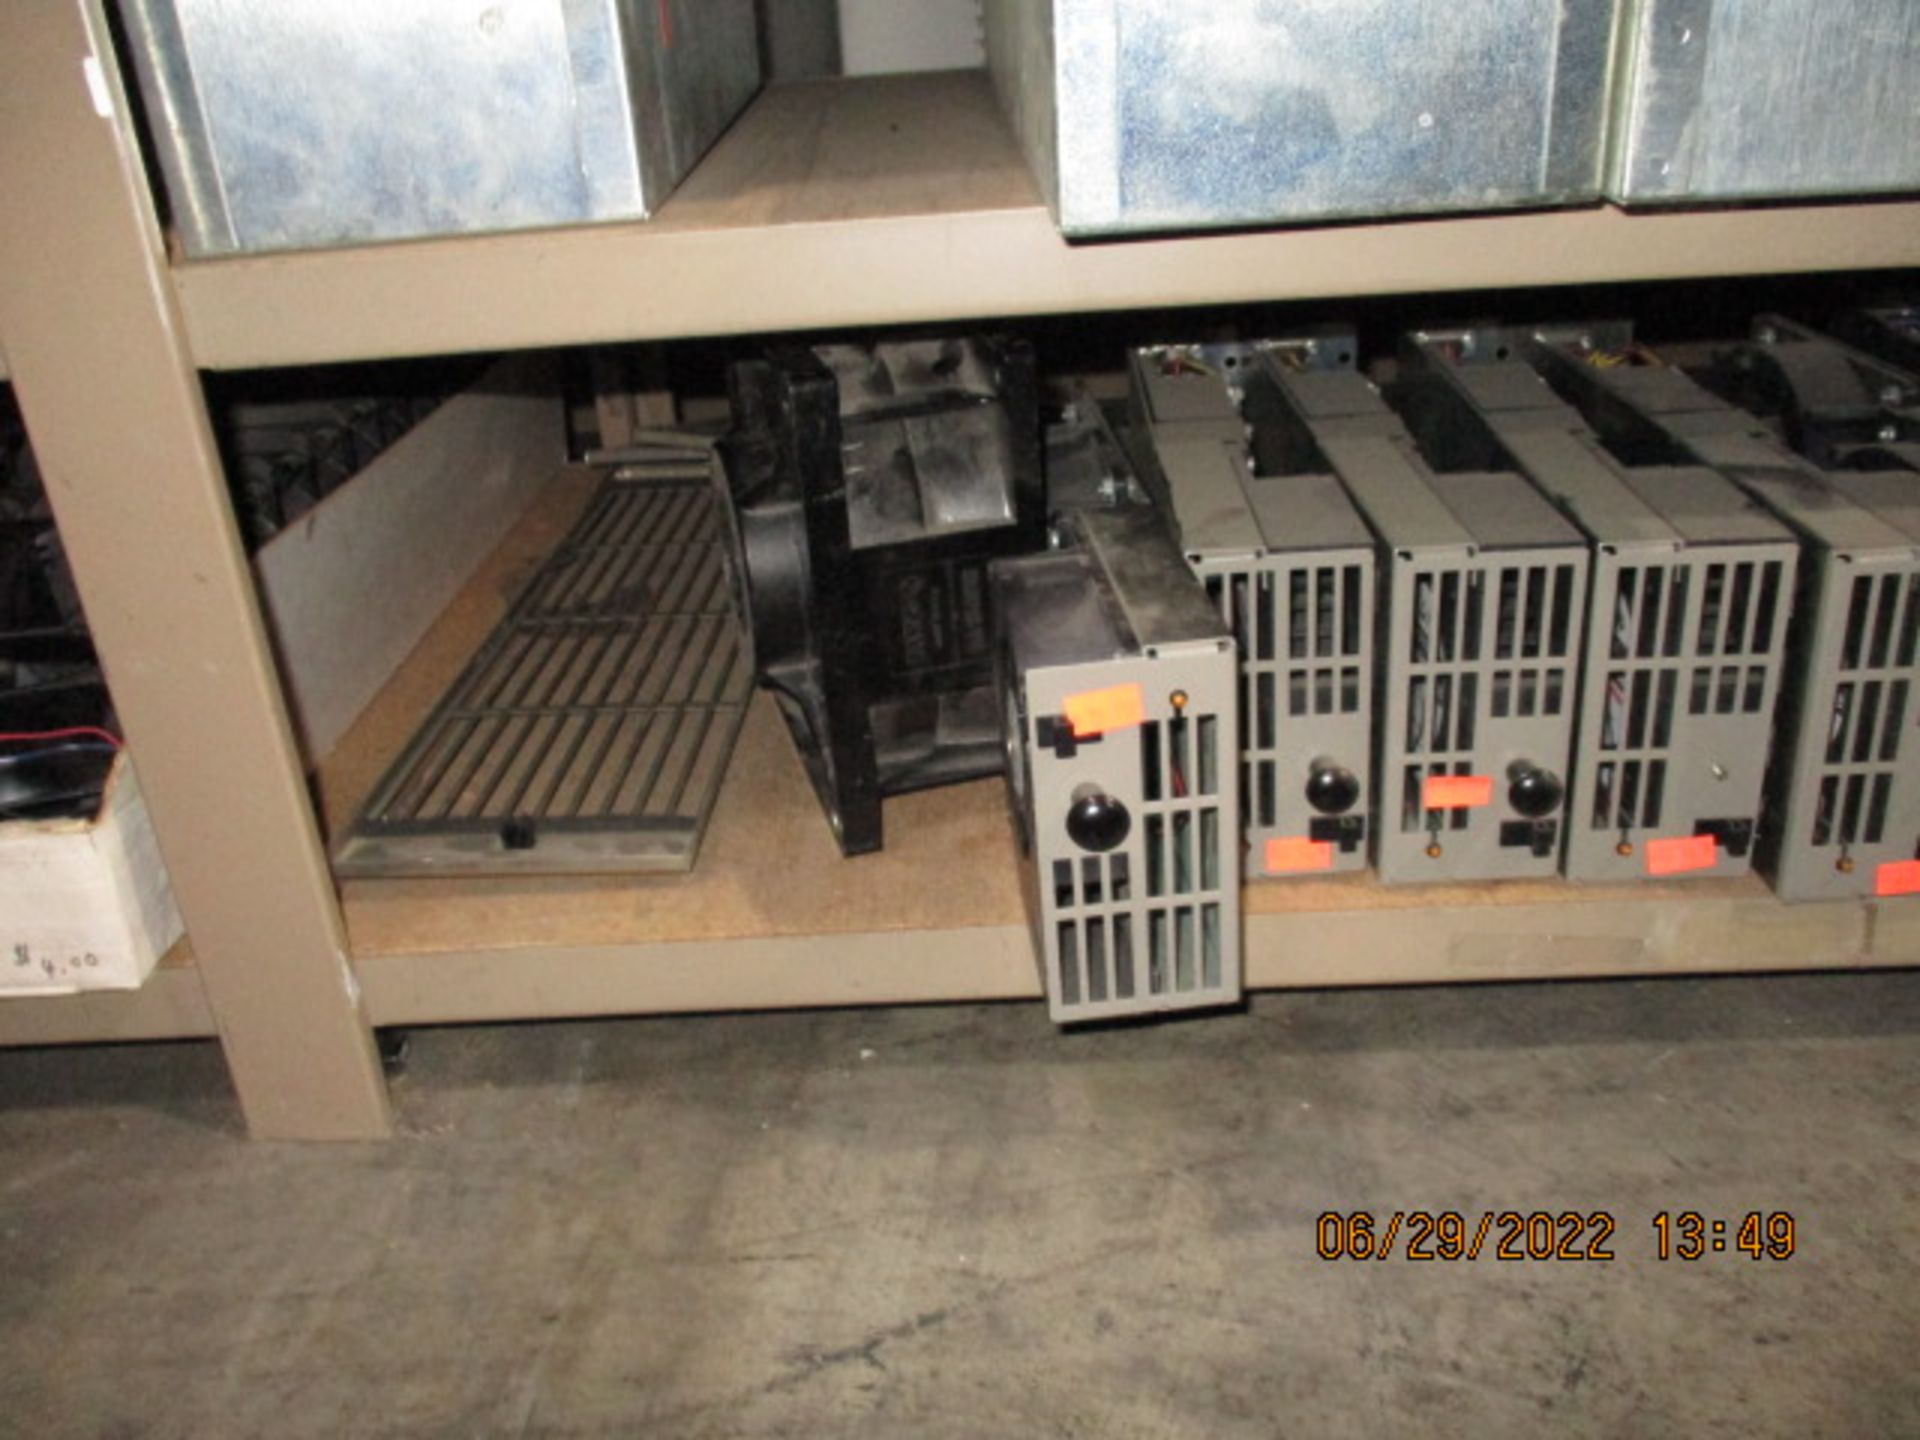 CONTENTS OF SHELVING UNIT CONSISTING OF ASSORTMENT OF FANS - Image 14 of 16